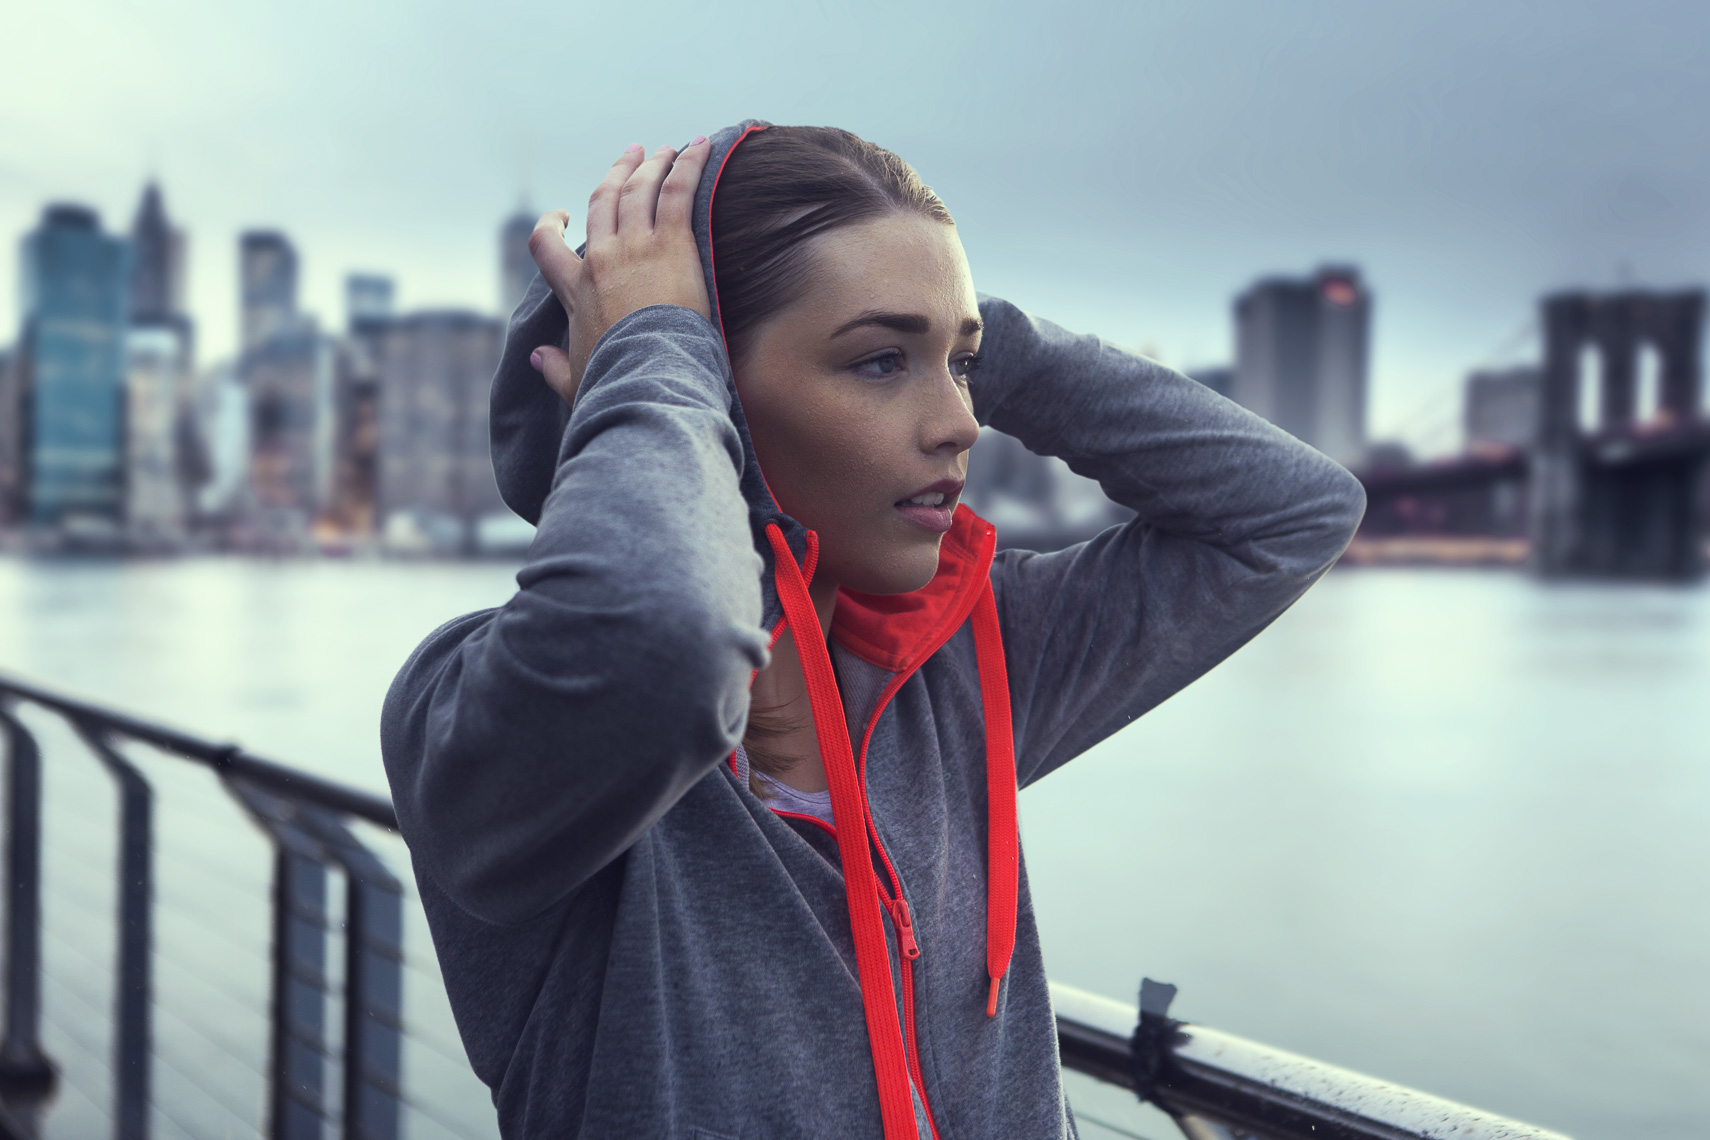 A girl exercising in New York City on a lifestyle photoshoot for an advertising agency 